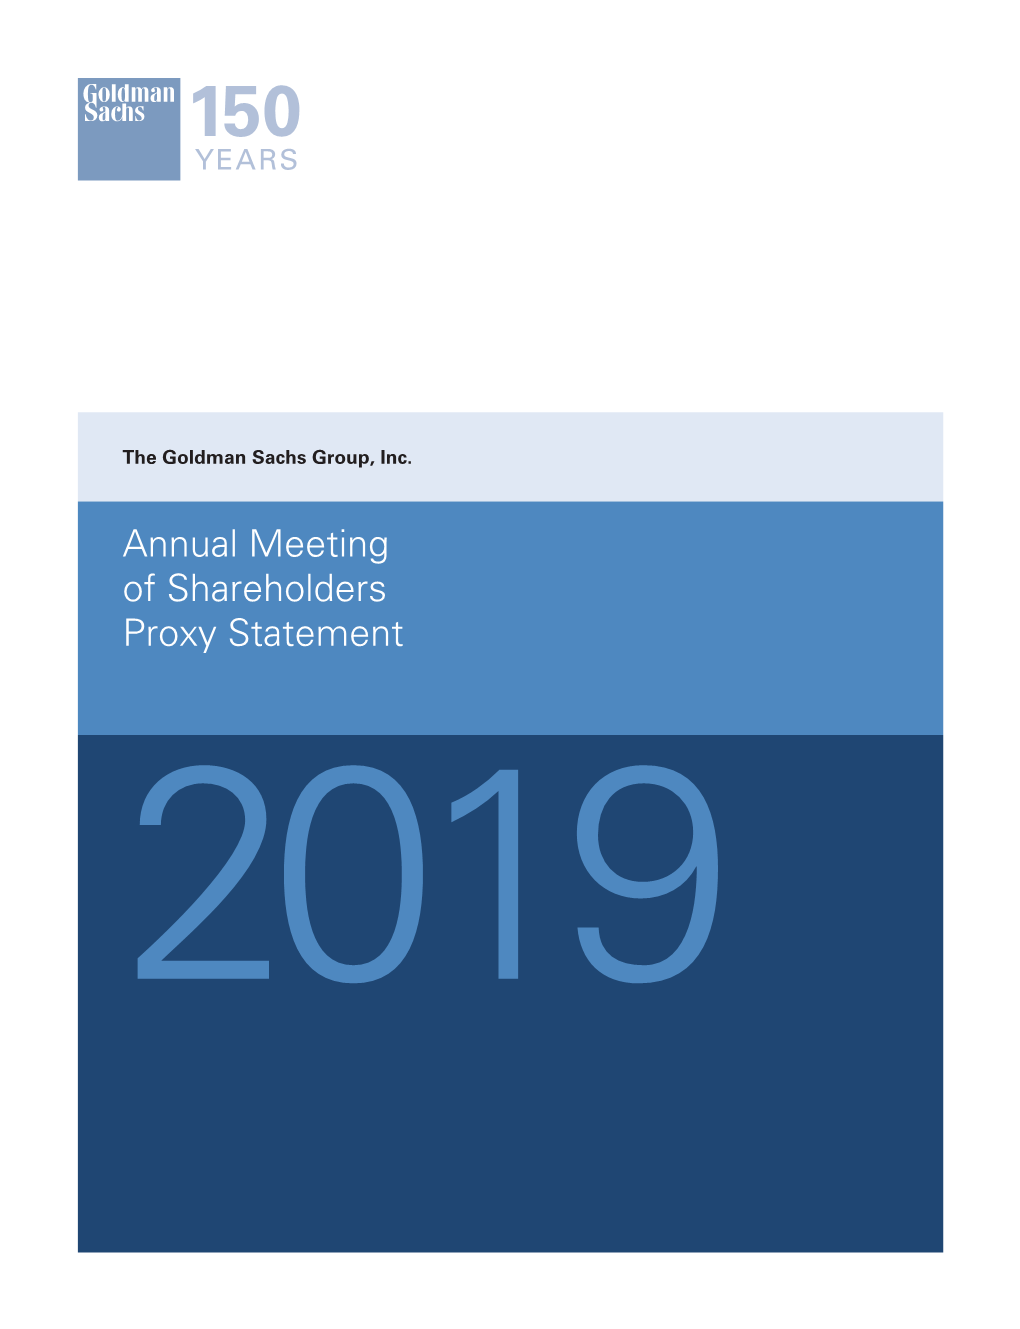 Proxy Statement for 2019 Annual Meeting of Shareholders